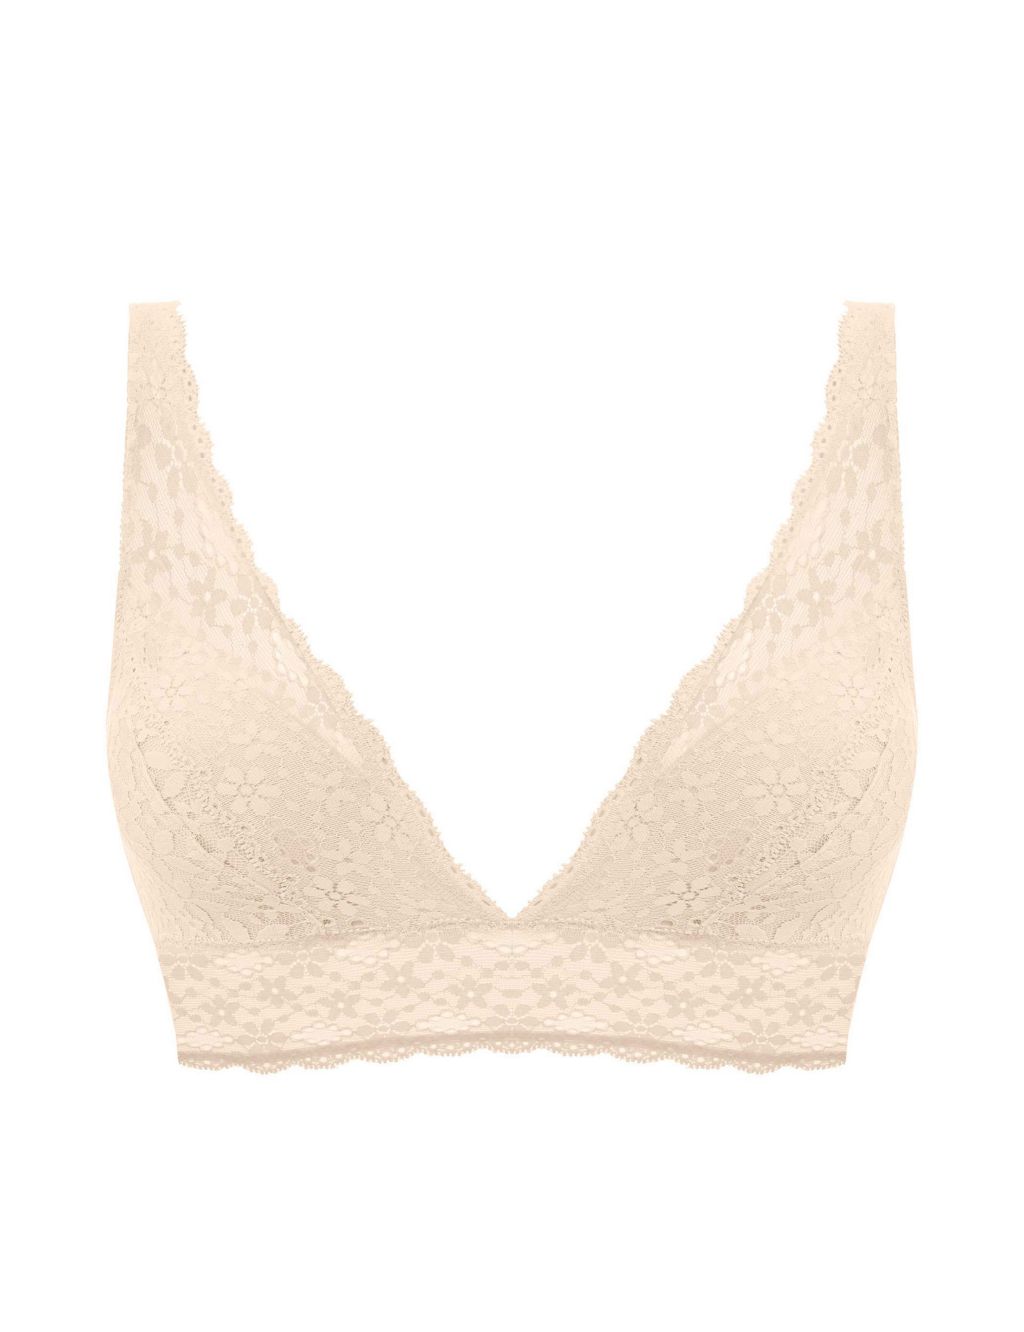 Halo Floral Lace Non Wired Plunge Bra image 2